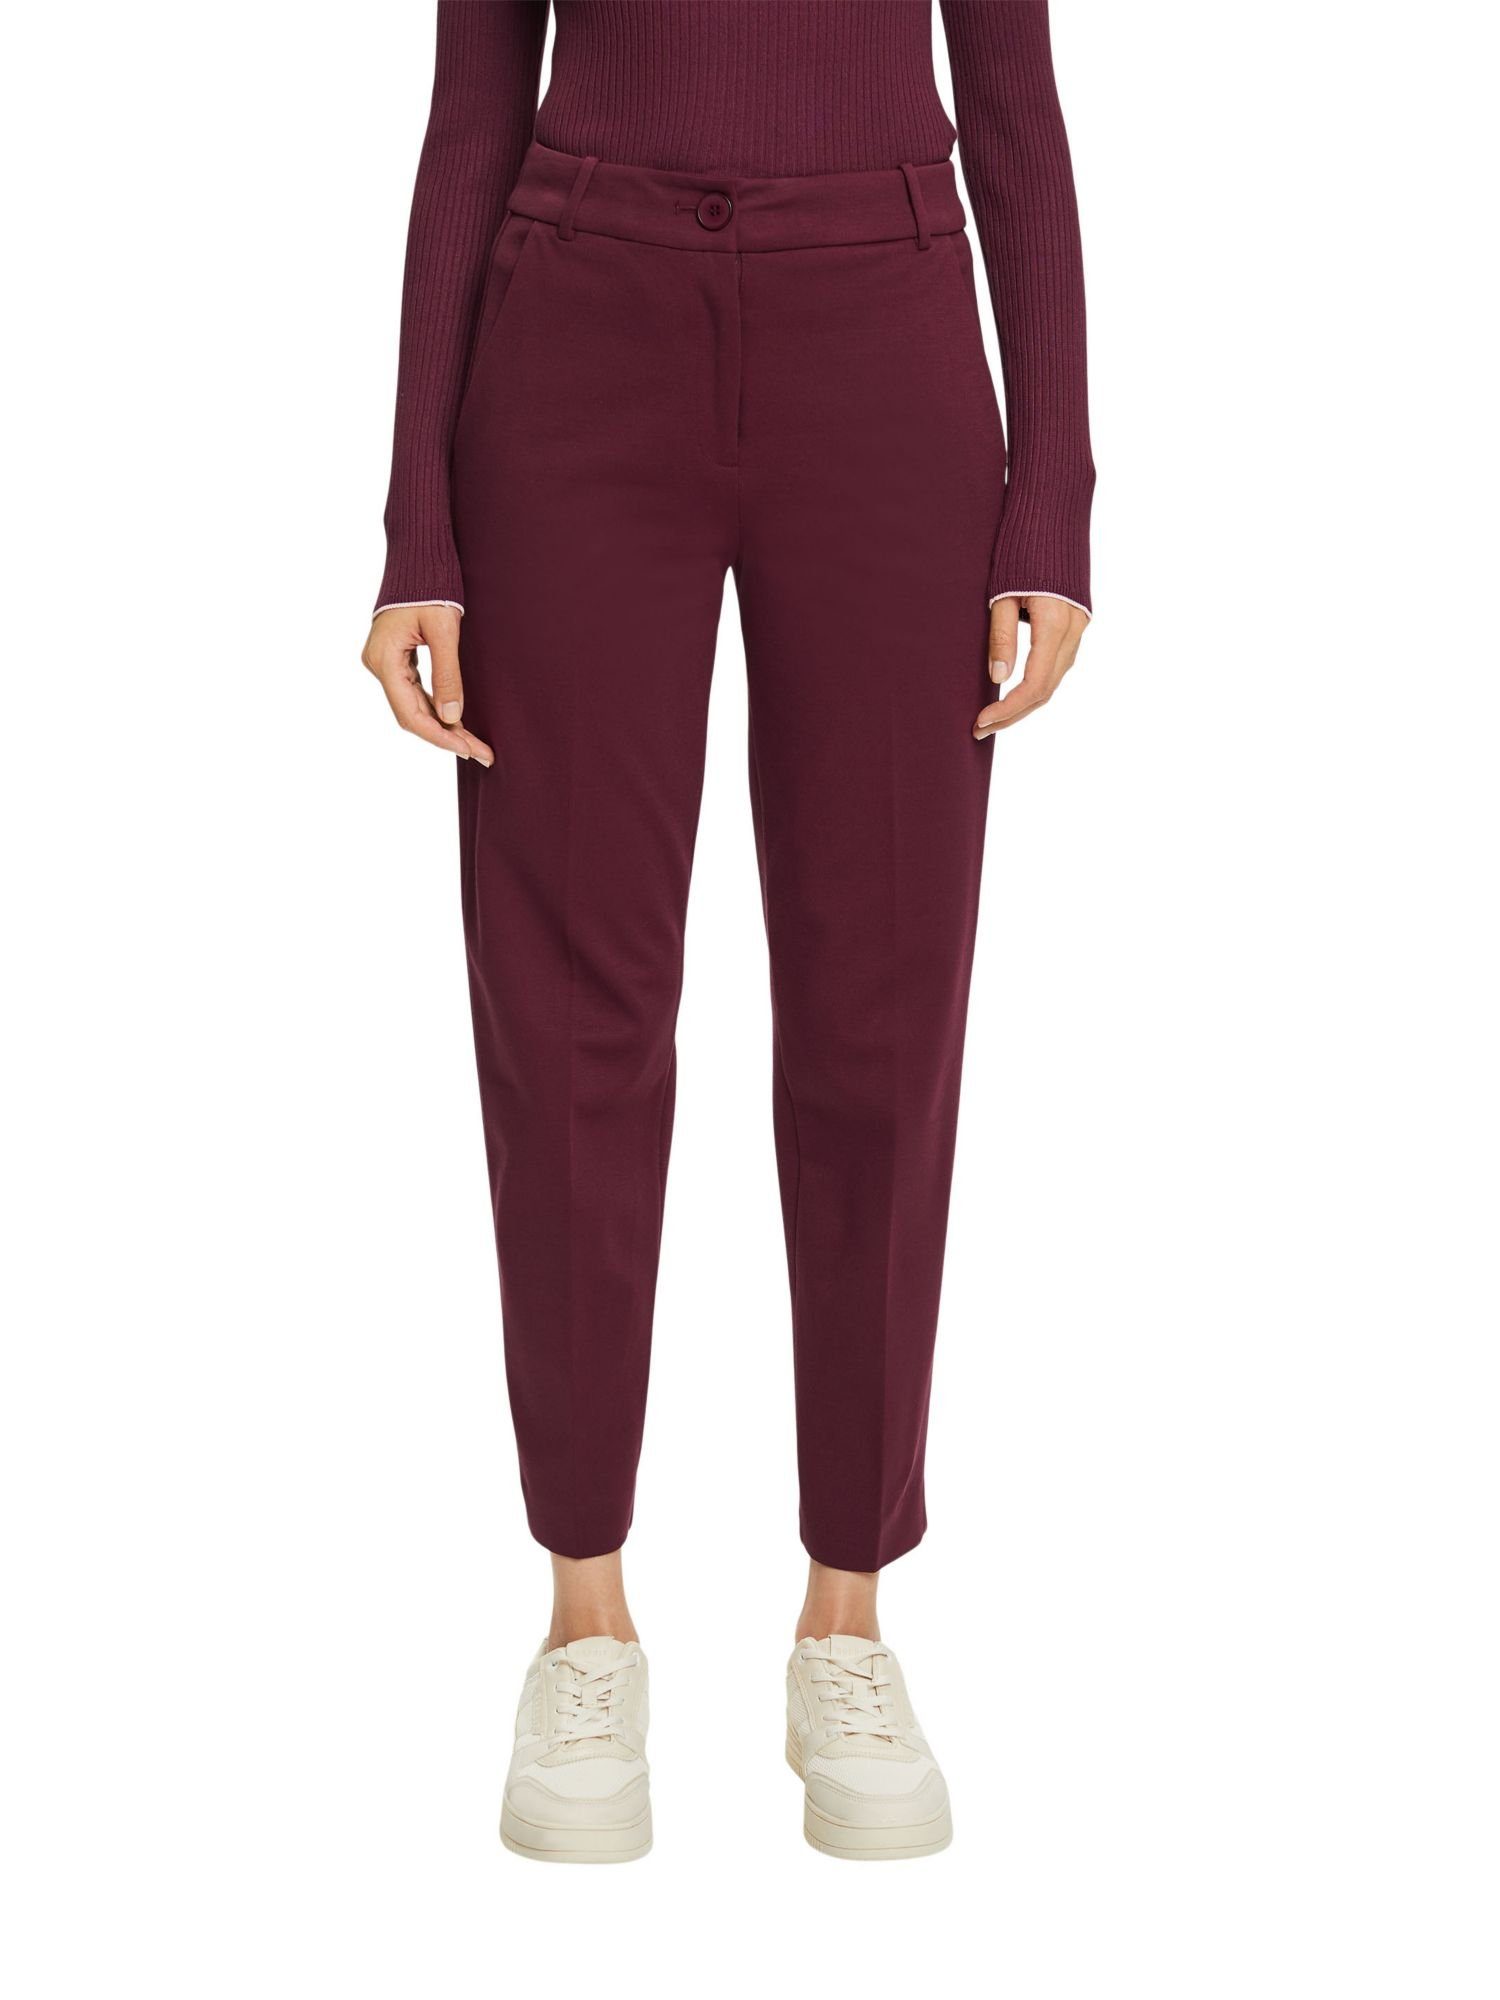 Esprit AUBERGINE Mix Pants PUNTO Tapered Match Stretch-Hose & Collection SPORTY